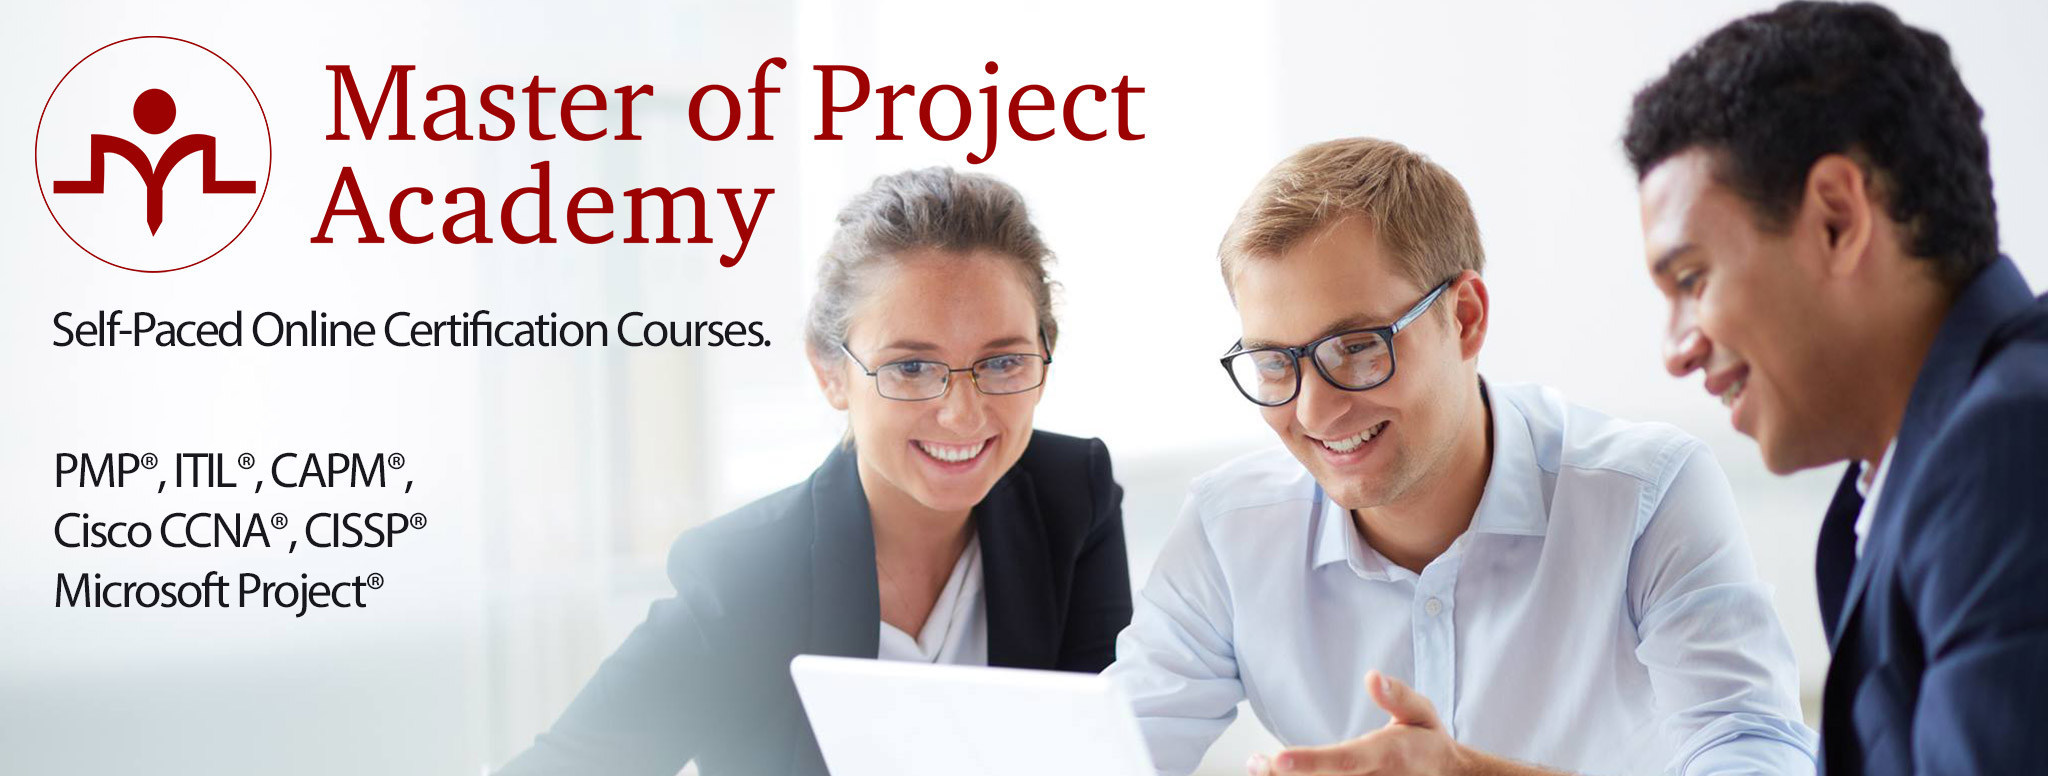 Master of Project Academy Celebrates 50K Users with 50% off Online